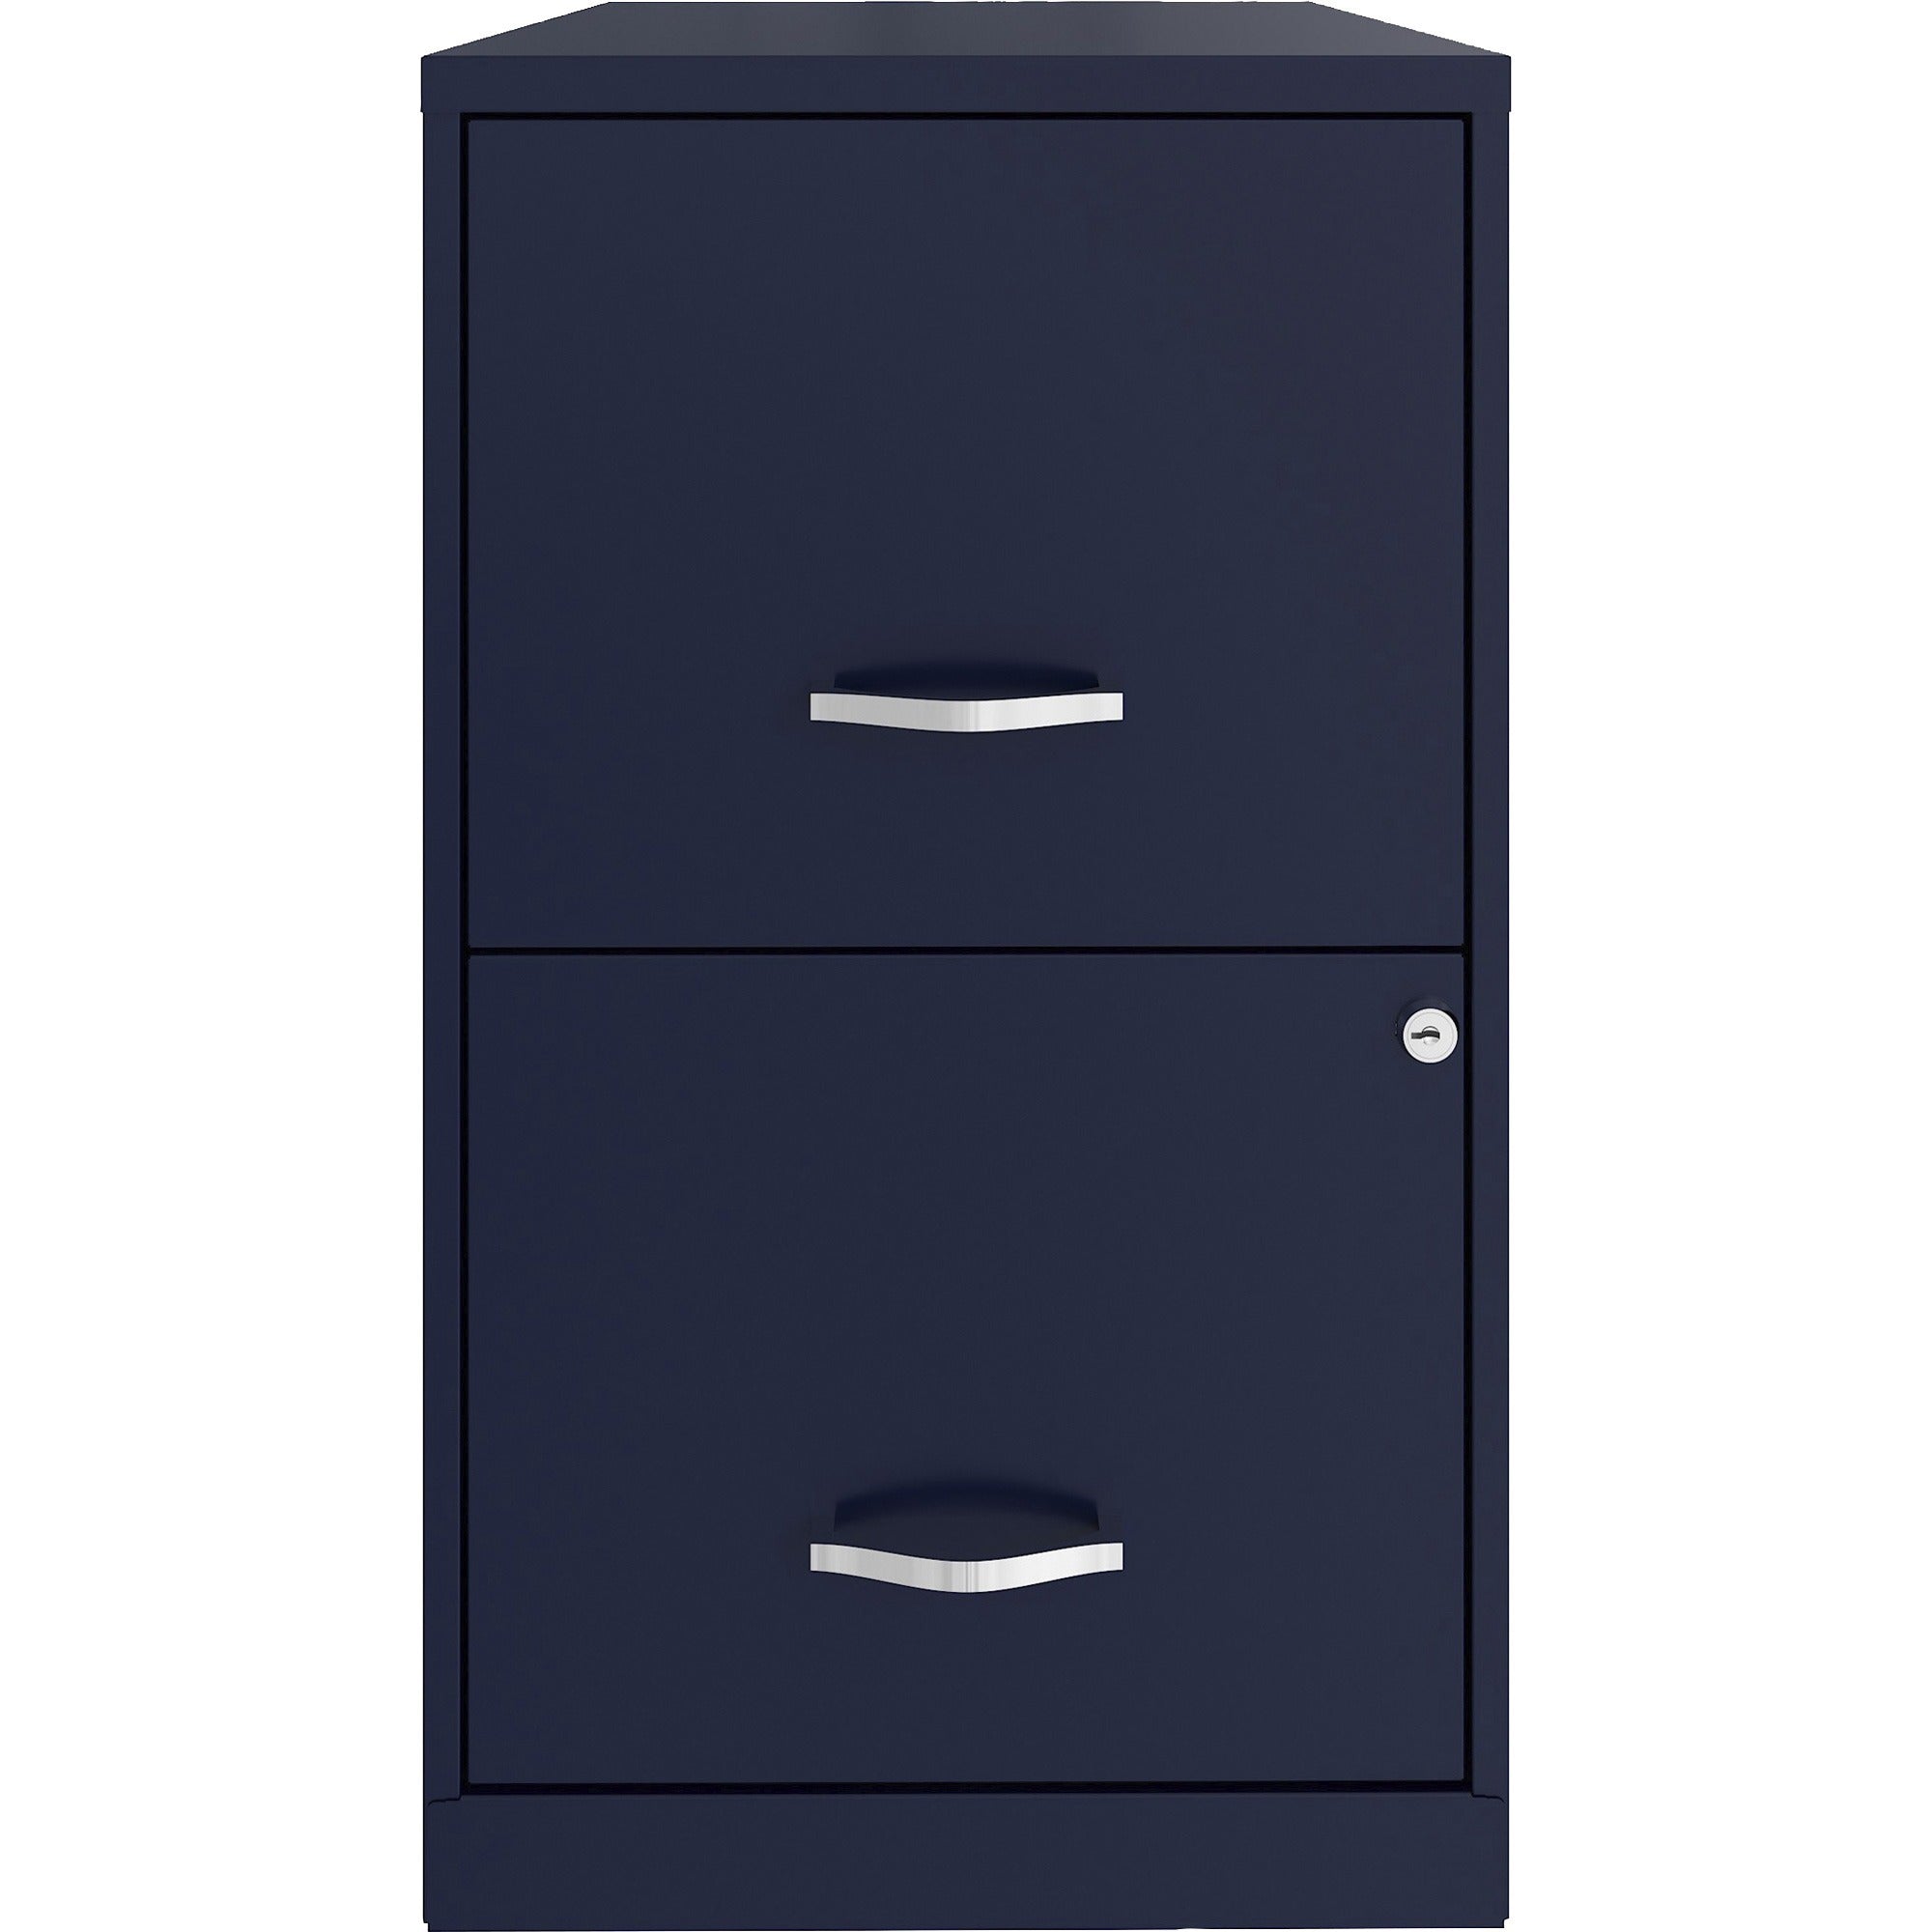 nusparc-file-cabinet-142-x-18-x-245-2-x-drawers-for-file-letter-vertical-locking-drawer-glide-suspension-nonporous-surface-blue-baked-enamel-steel-recycled_nprvf218aany - 2